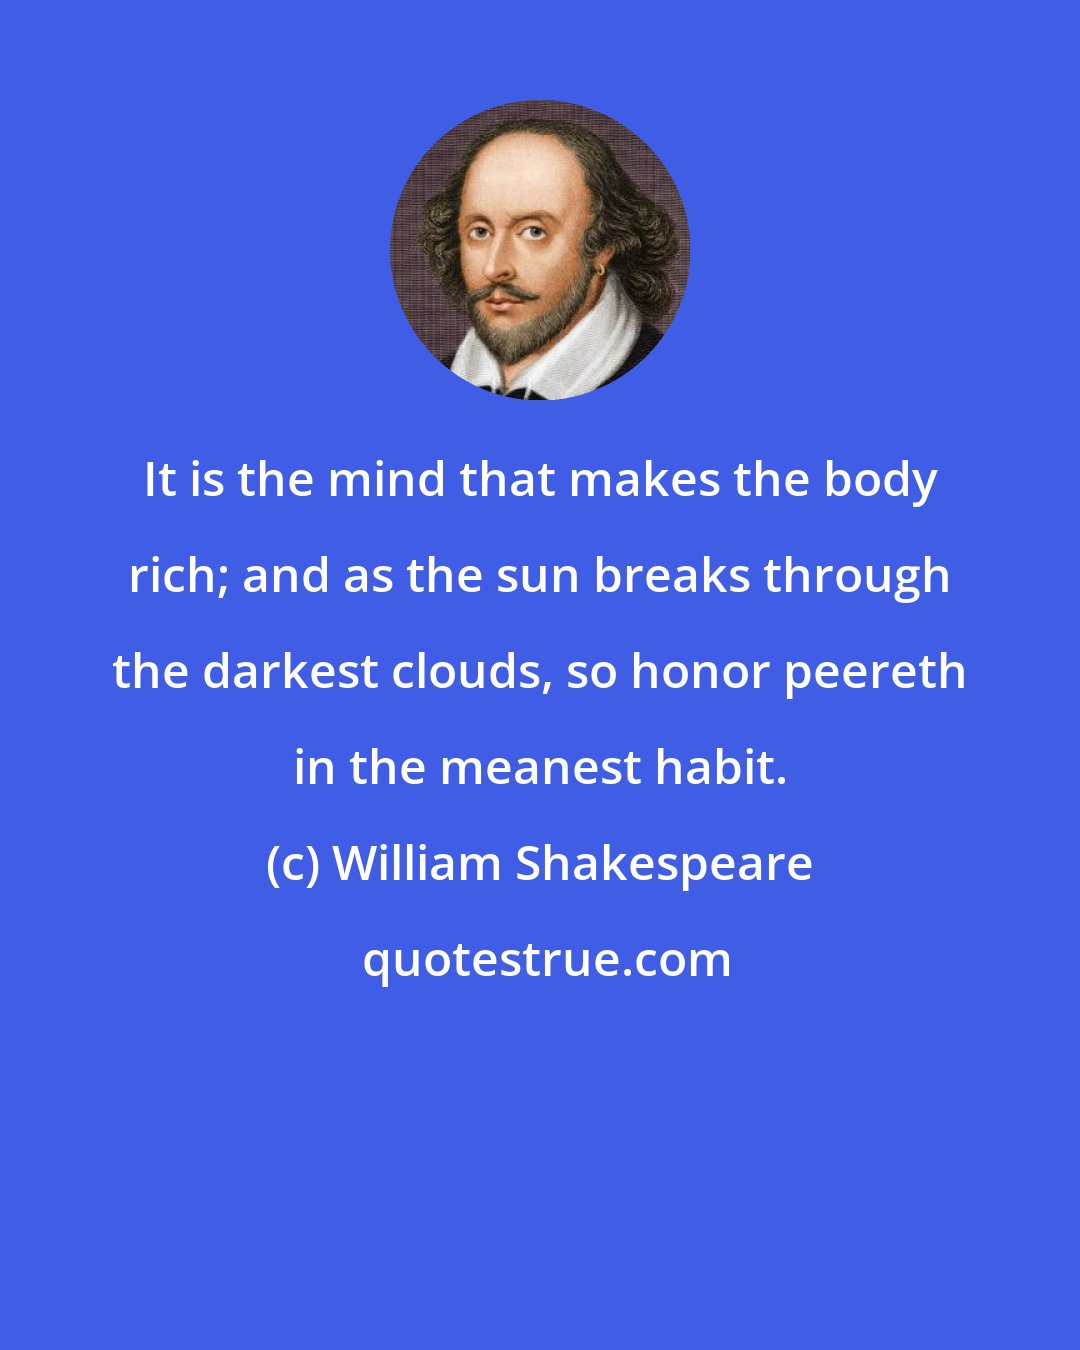 William Shakespeare: It is the mind that makes the body rich; and as the sun breaks through the darkest clouds, so honor peereth in the meanest habit.